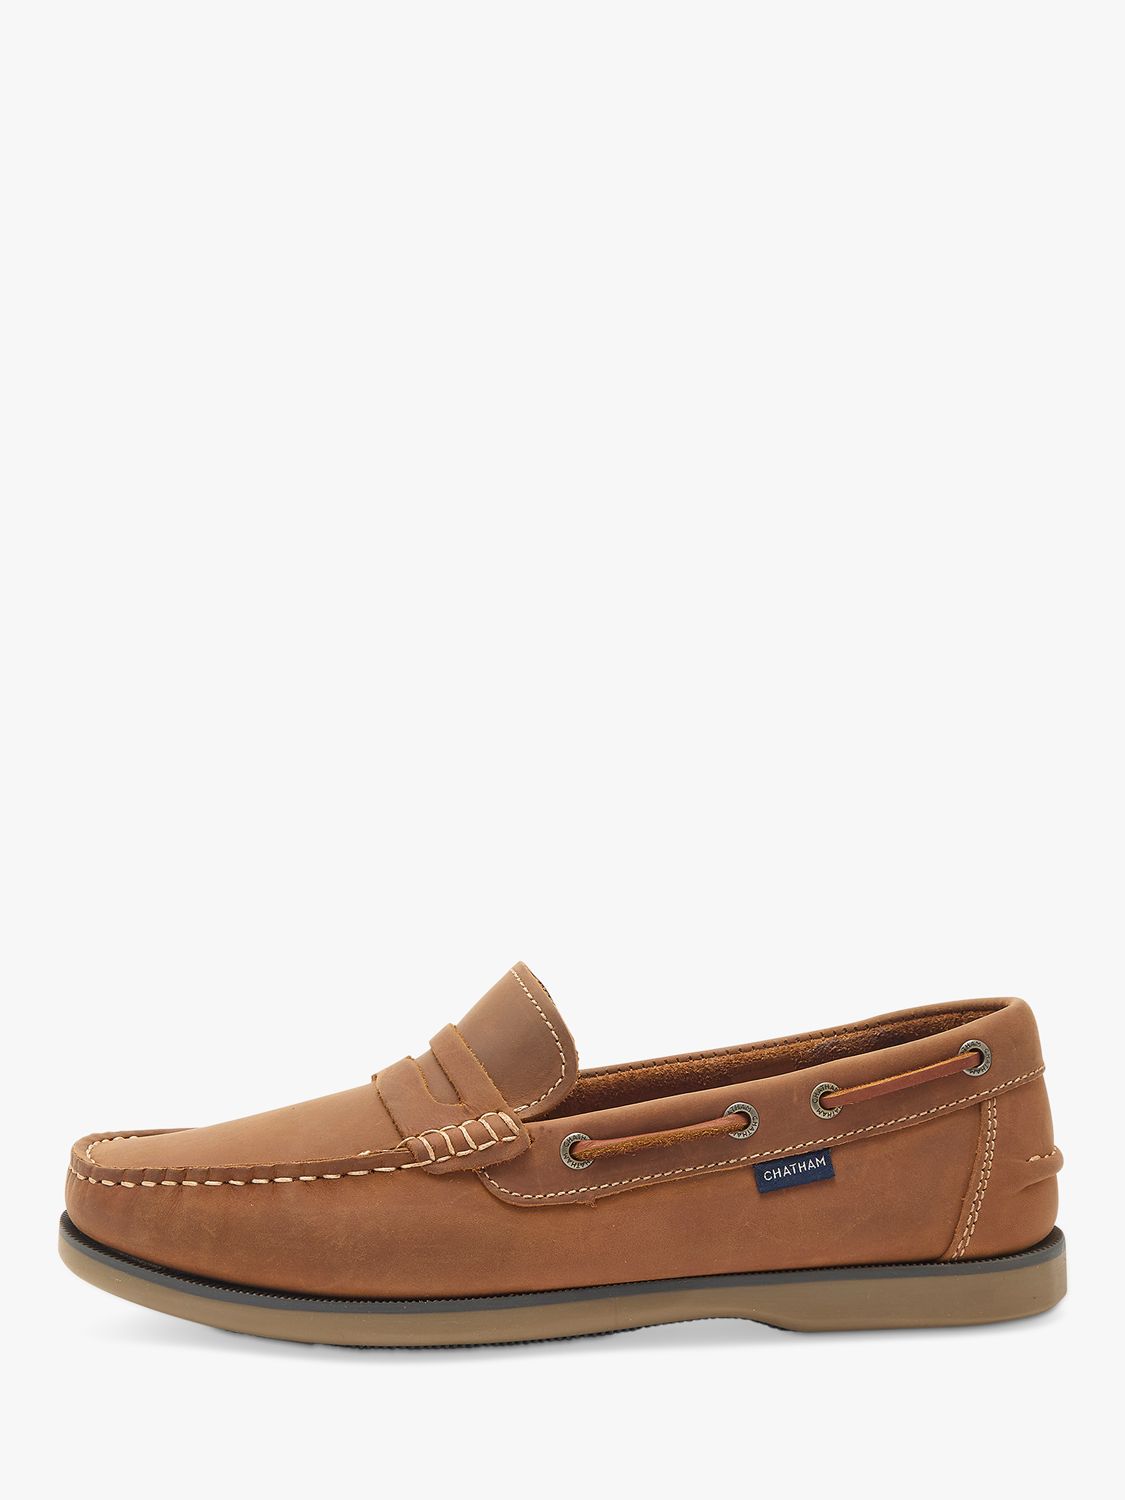 Chatham Shanklin Leather Loafers, Tan, 7